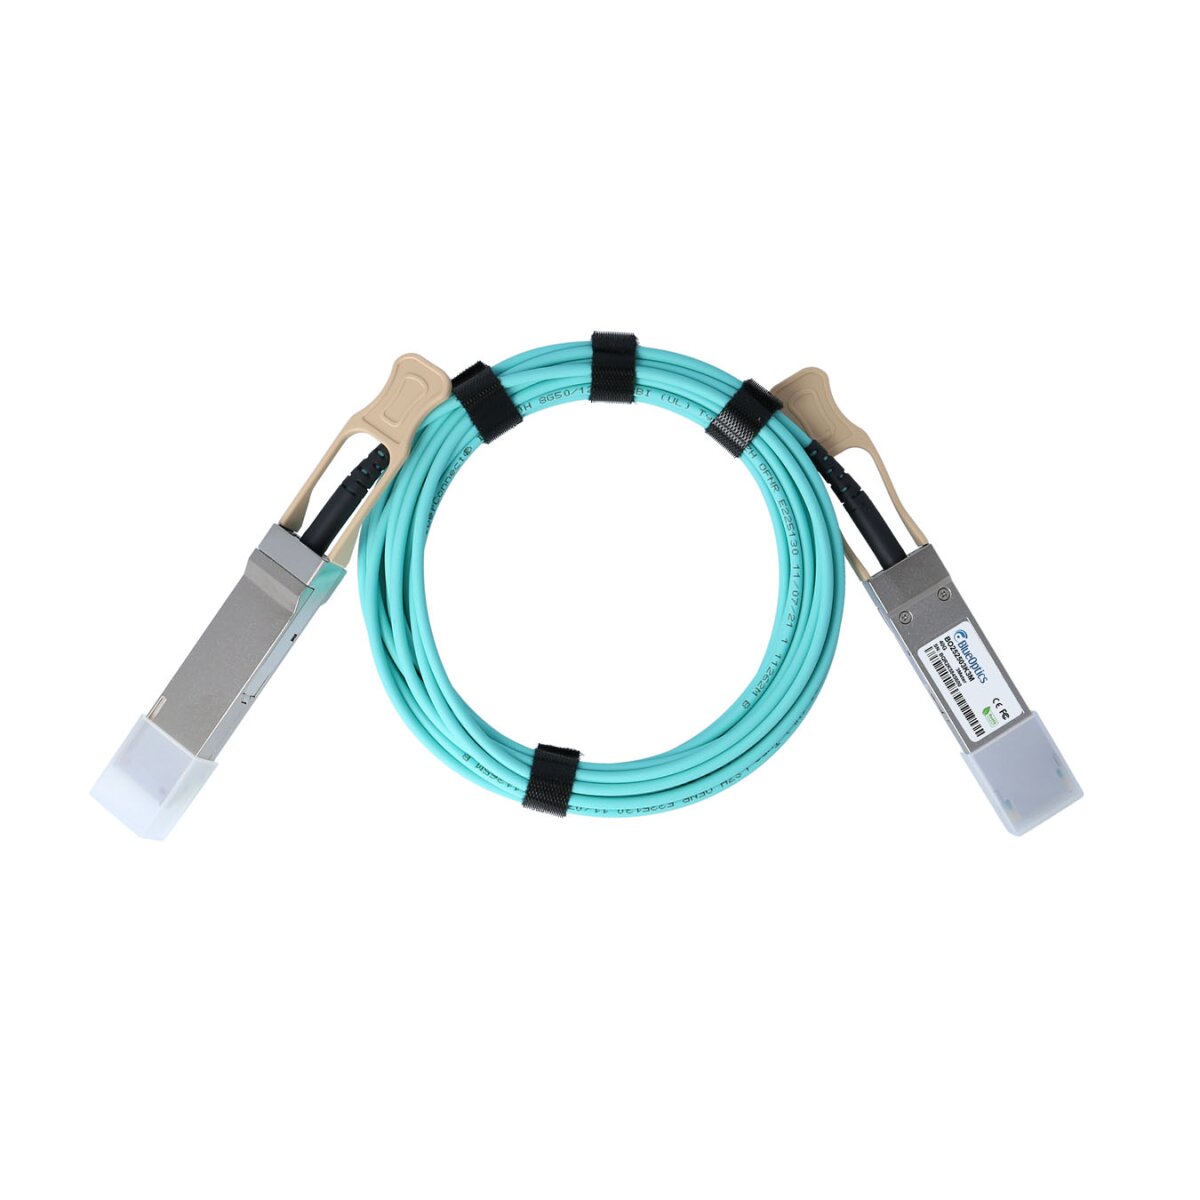 Cheap cables & IT shop online adapters the in OCTO AG